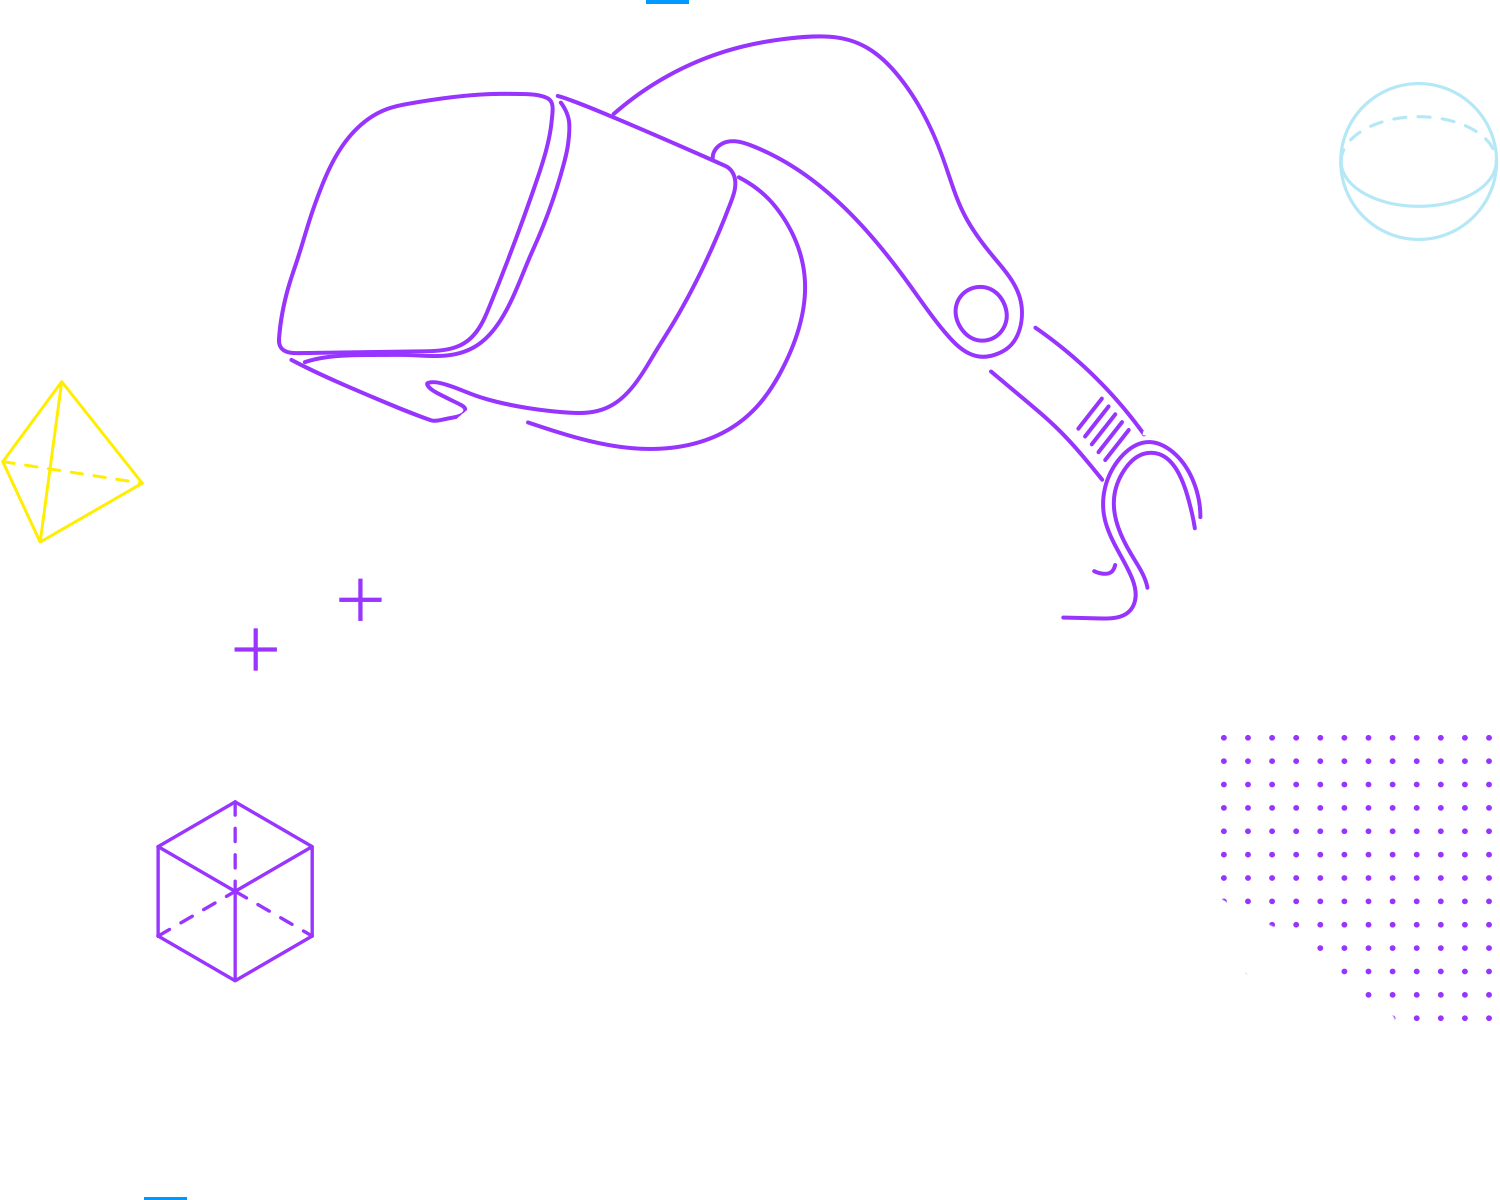 vr and ar designs for 3d experiences